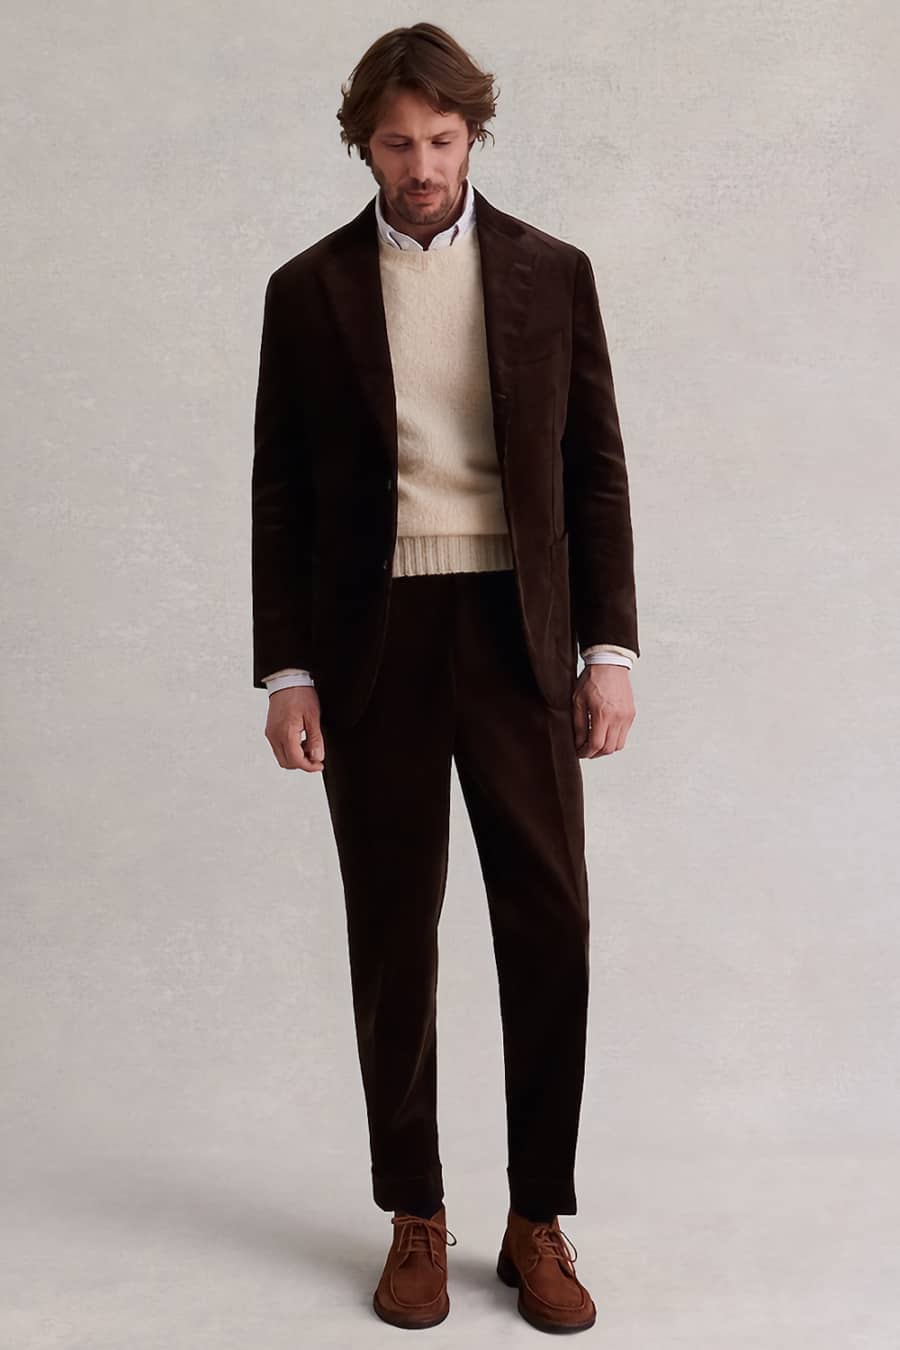 Men's brown corduroy suit, ecru sweater, suede brown chukka boots outfit